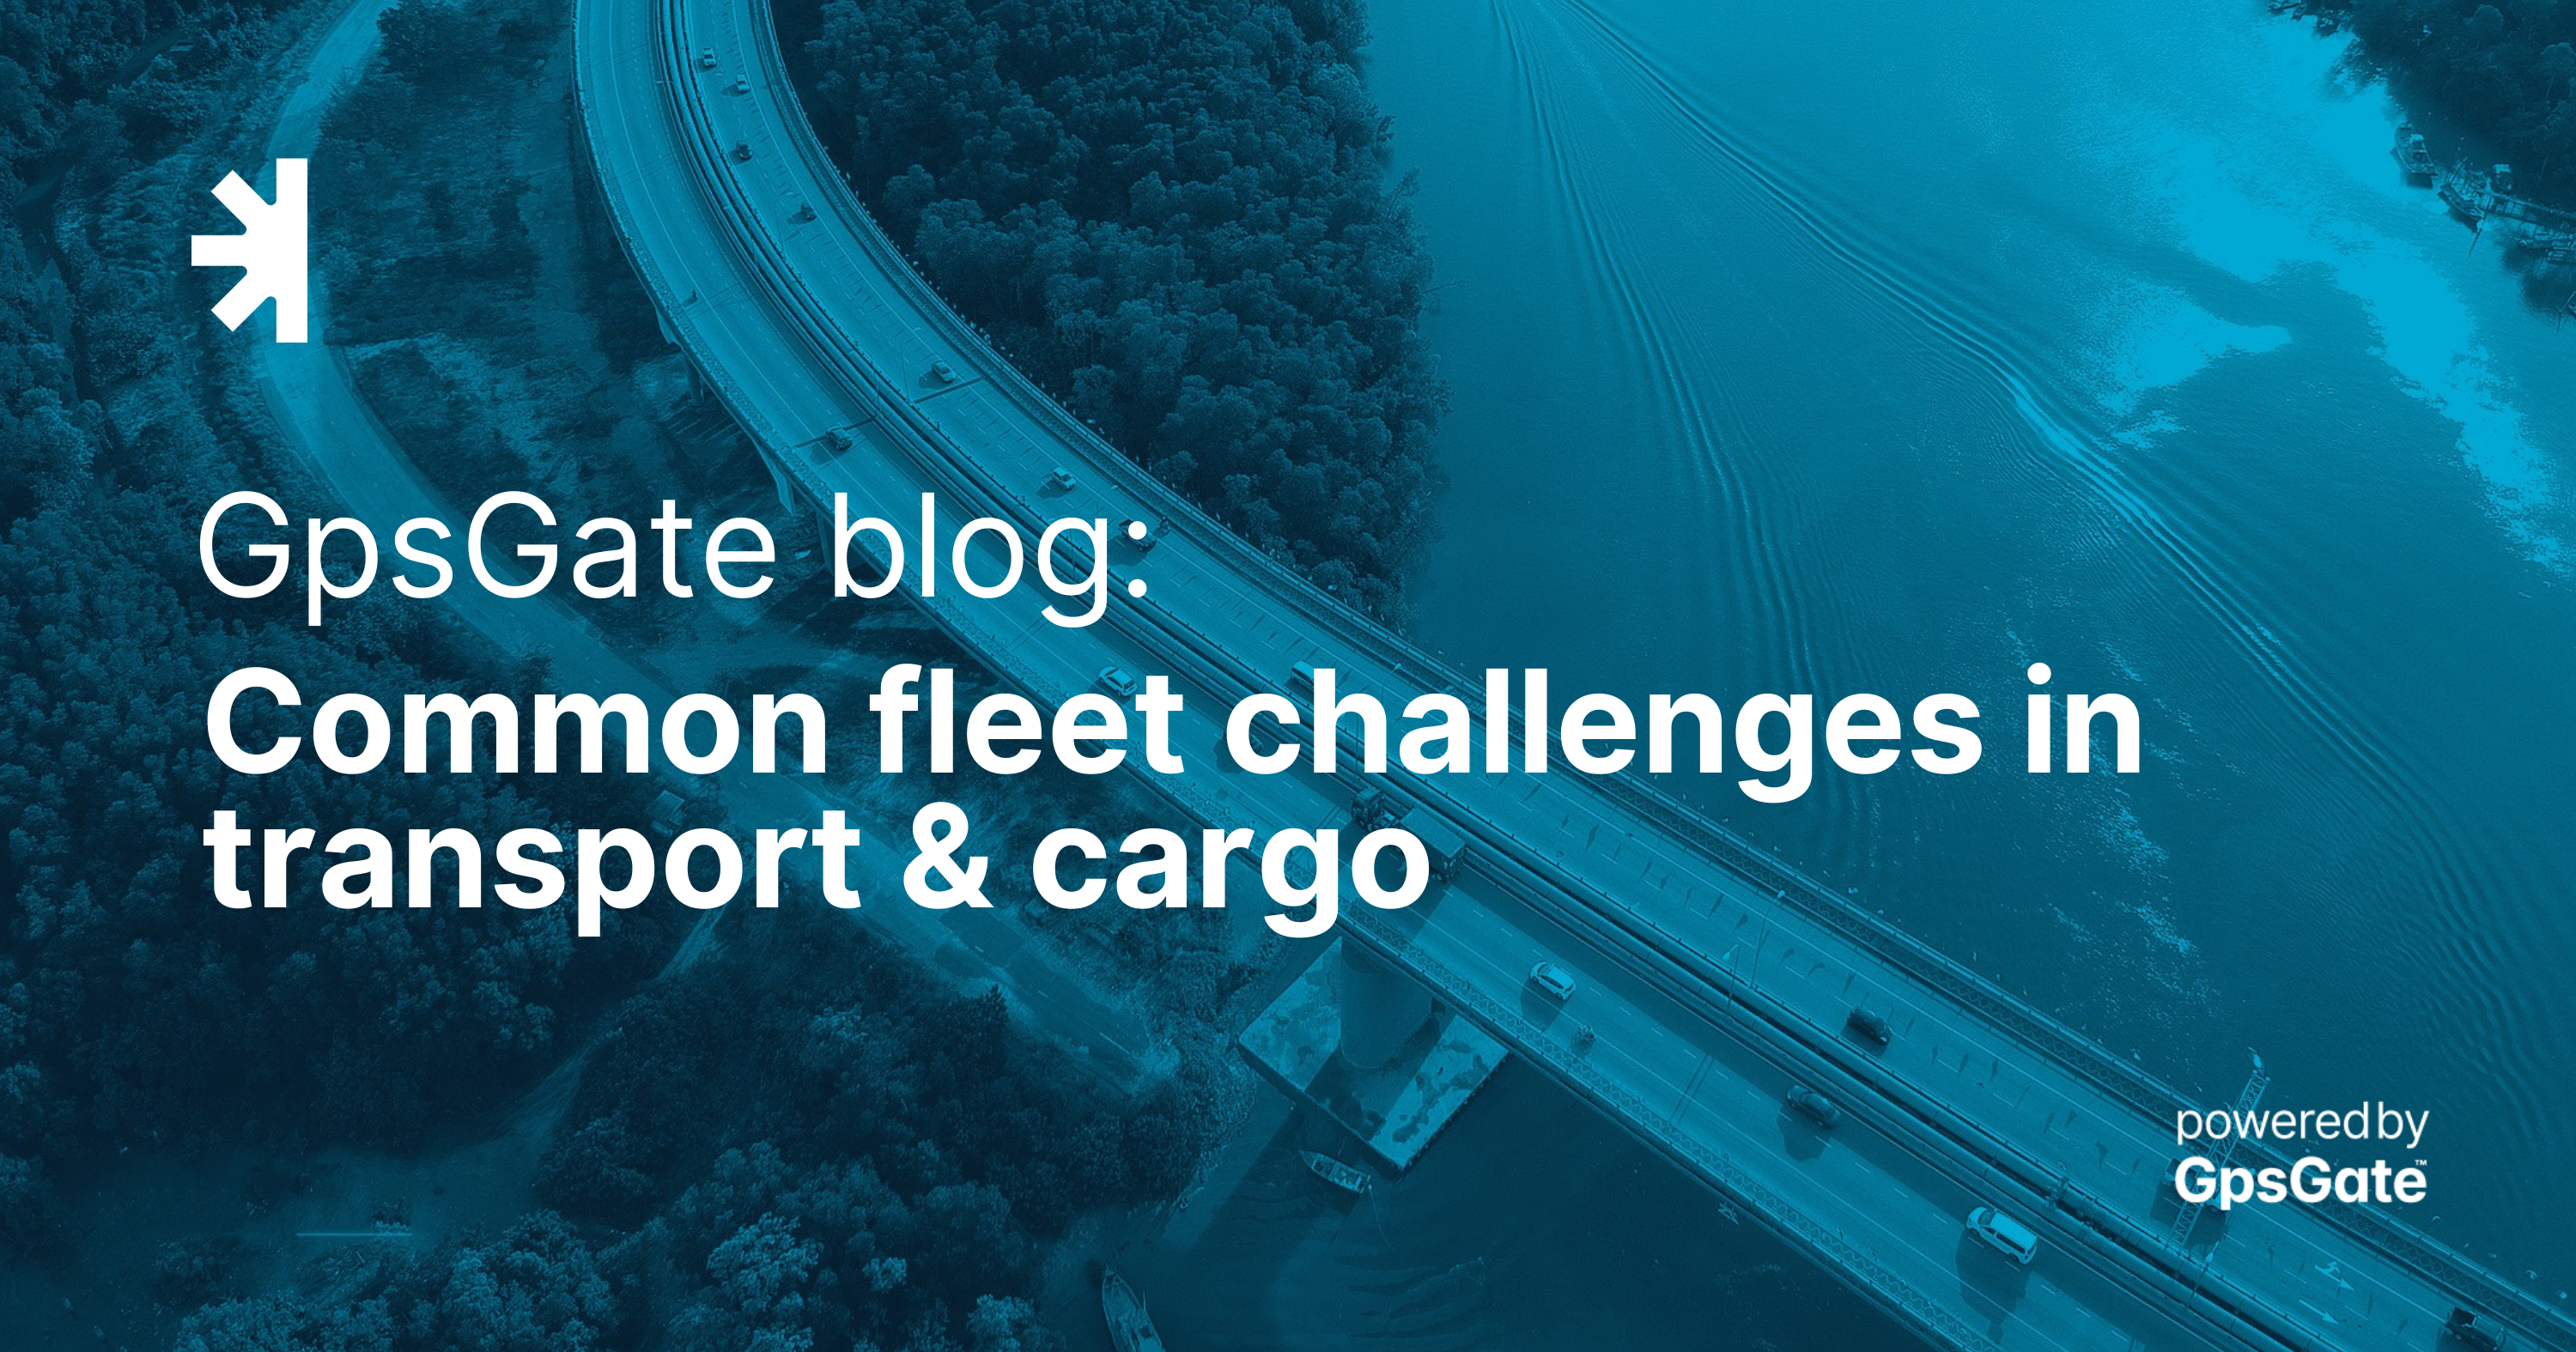 GpsGate solves common fleet challenges within transport and cargo